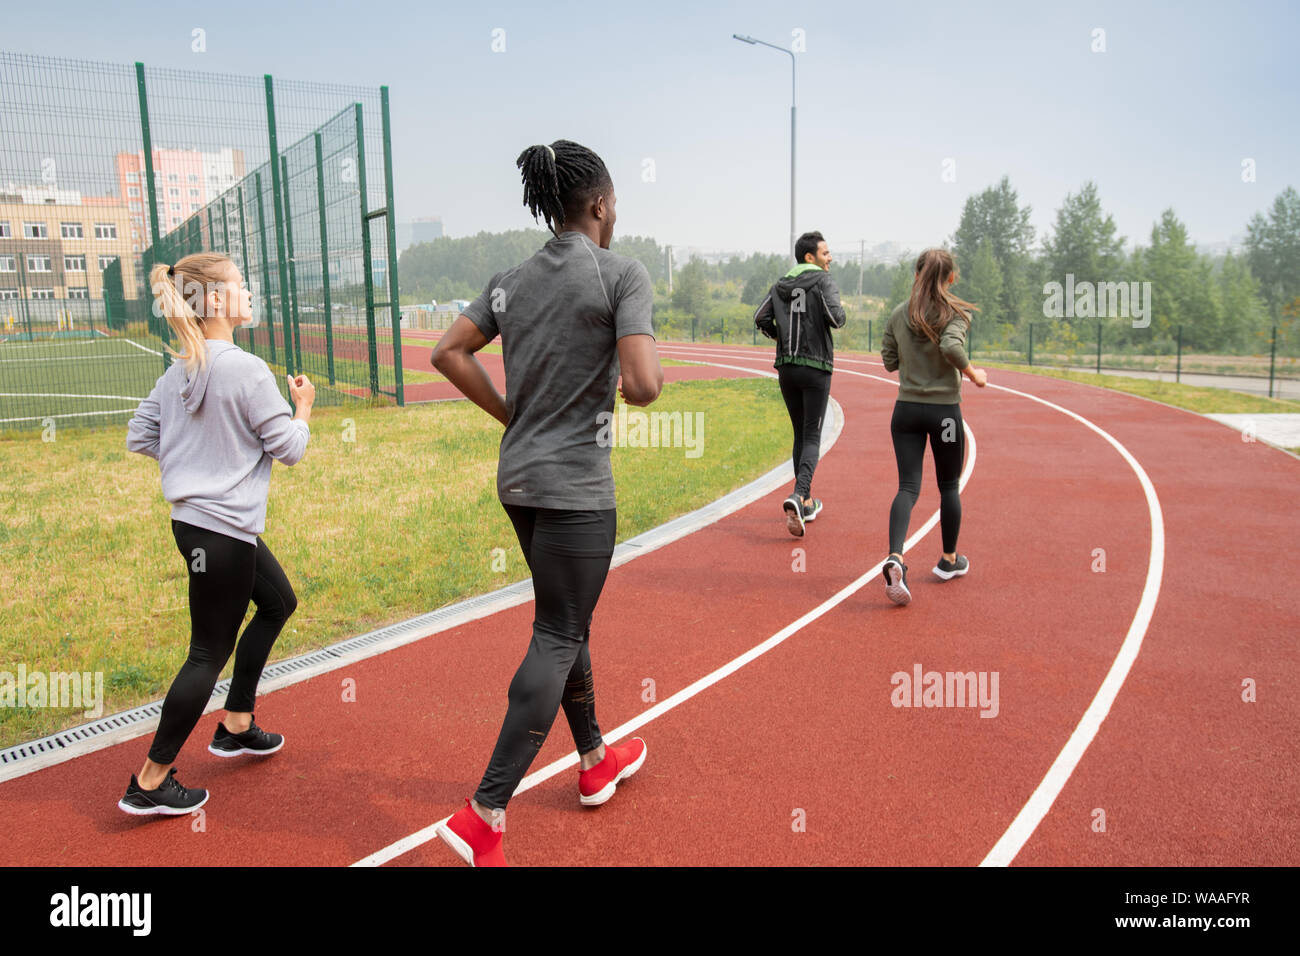 Rear view of young intercultural people in activewear running down race track Stock Photo